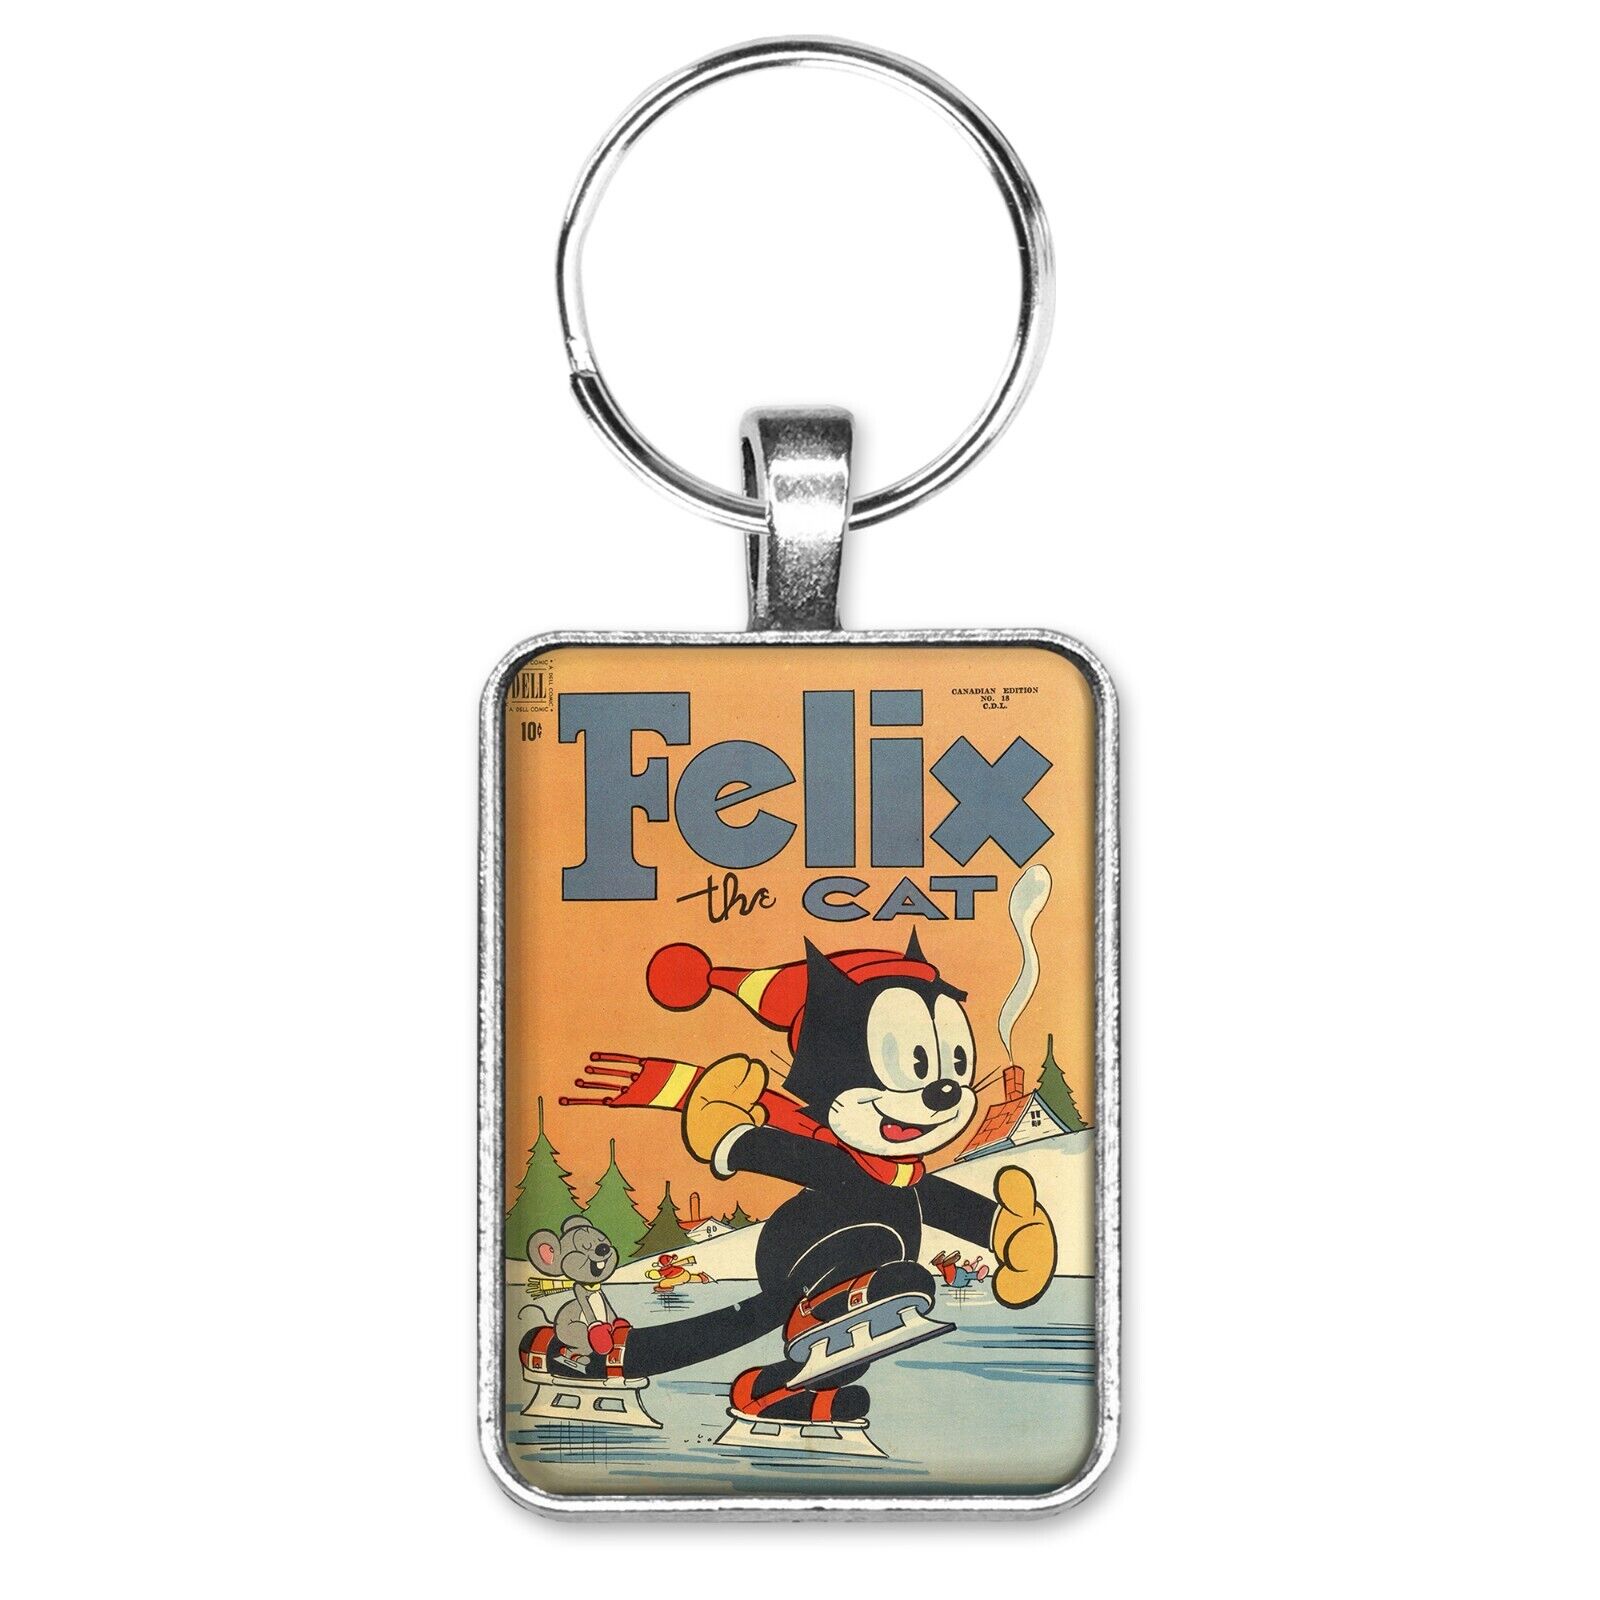 Felix the Cat #18 Cover Key Ring or Necklace Classic Cartoon Comic Book Jewelry